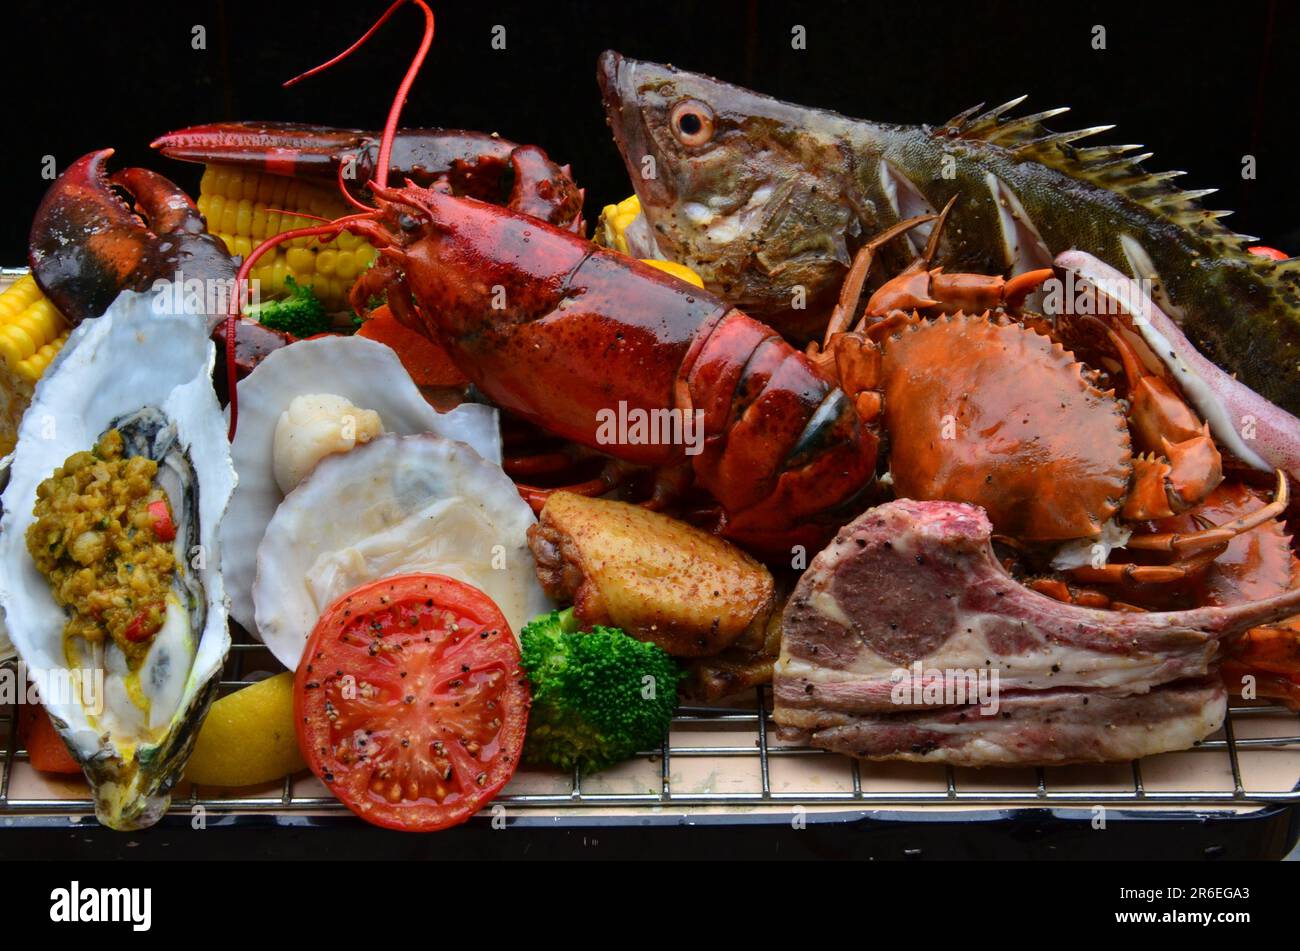 A platter of assorted seafood and meats is presented on a white plate Stock Photo